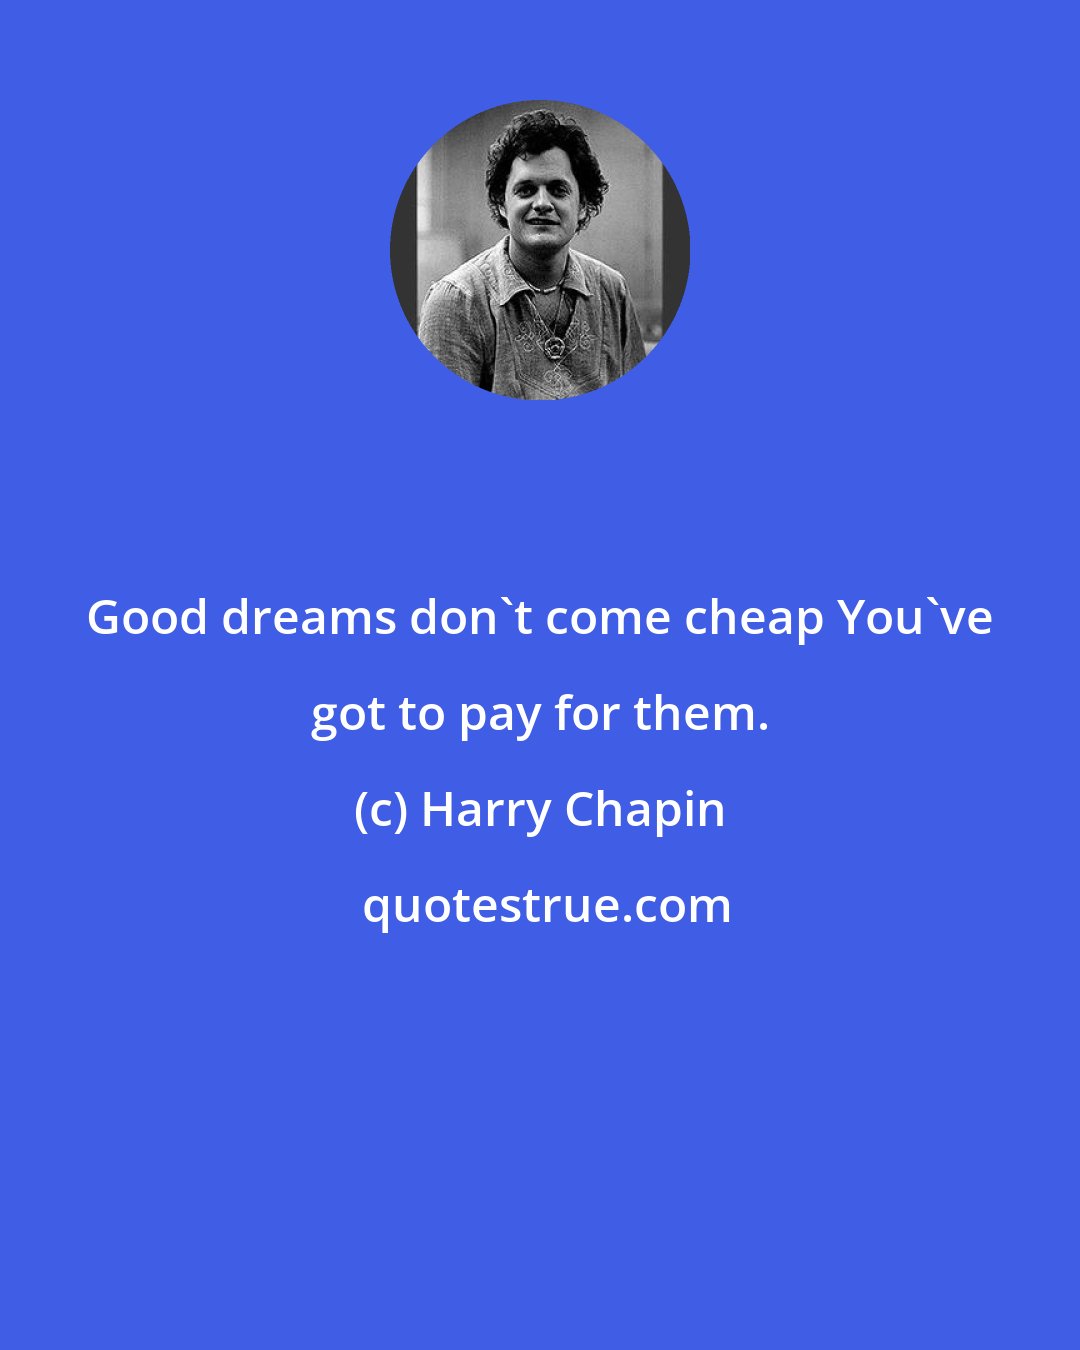 Harry Chapin: Good dreams don't come cheap You've got to pay for them.